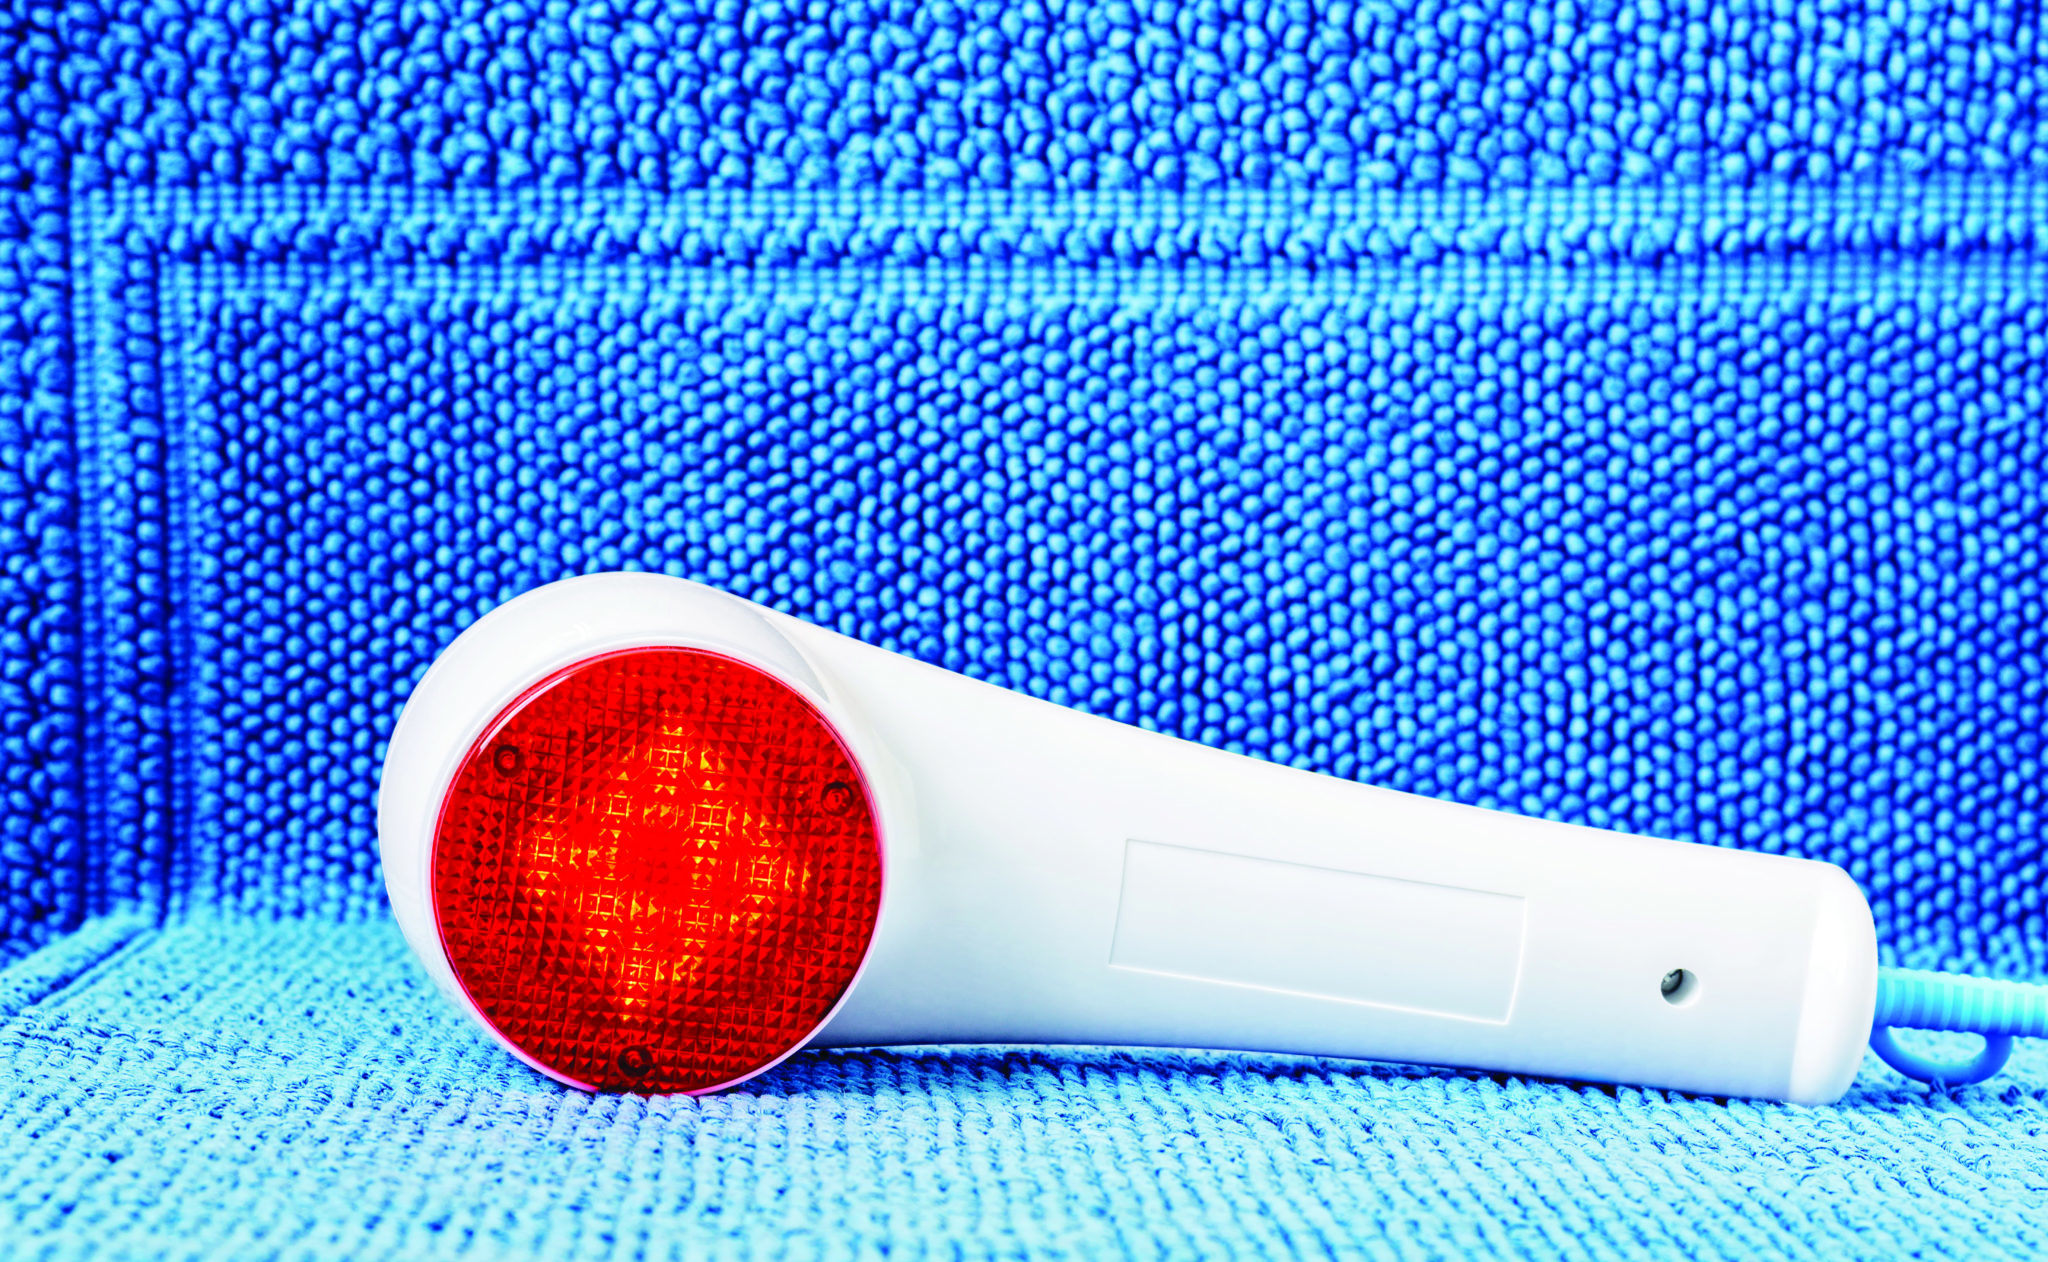 The Ultimate Guide To Red Light Therapy And Near Infrared Light Therapy Updated 2020 The Energy Blueprint Red Light Therapy Red Light Therapy Benefits Light Therapy